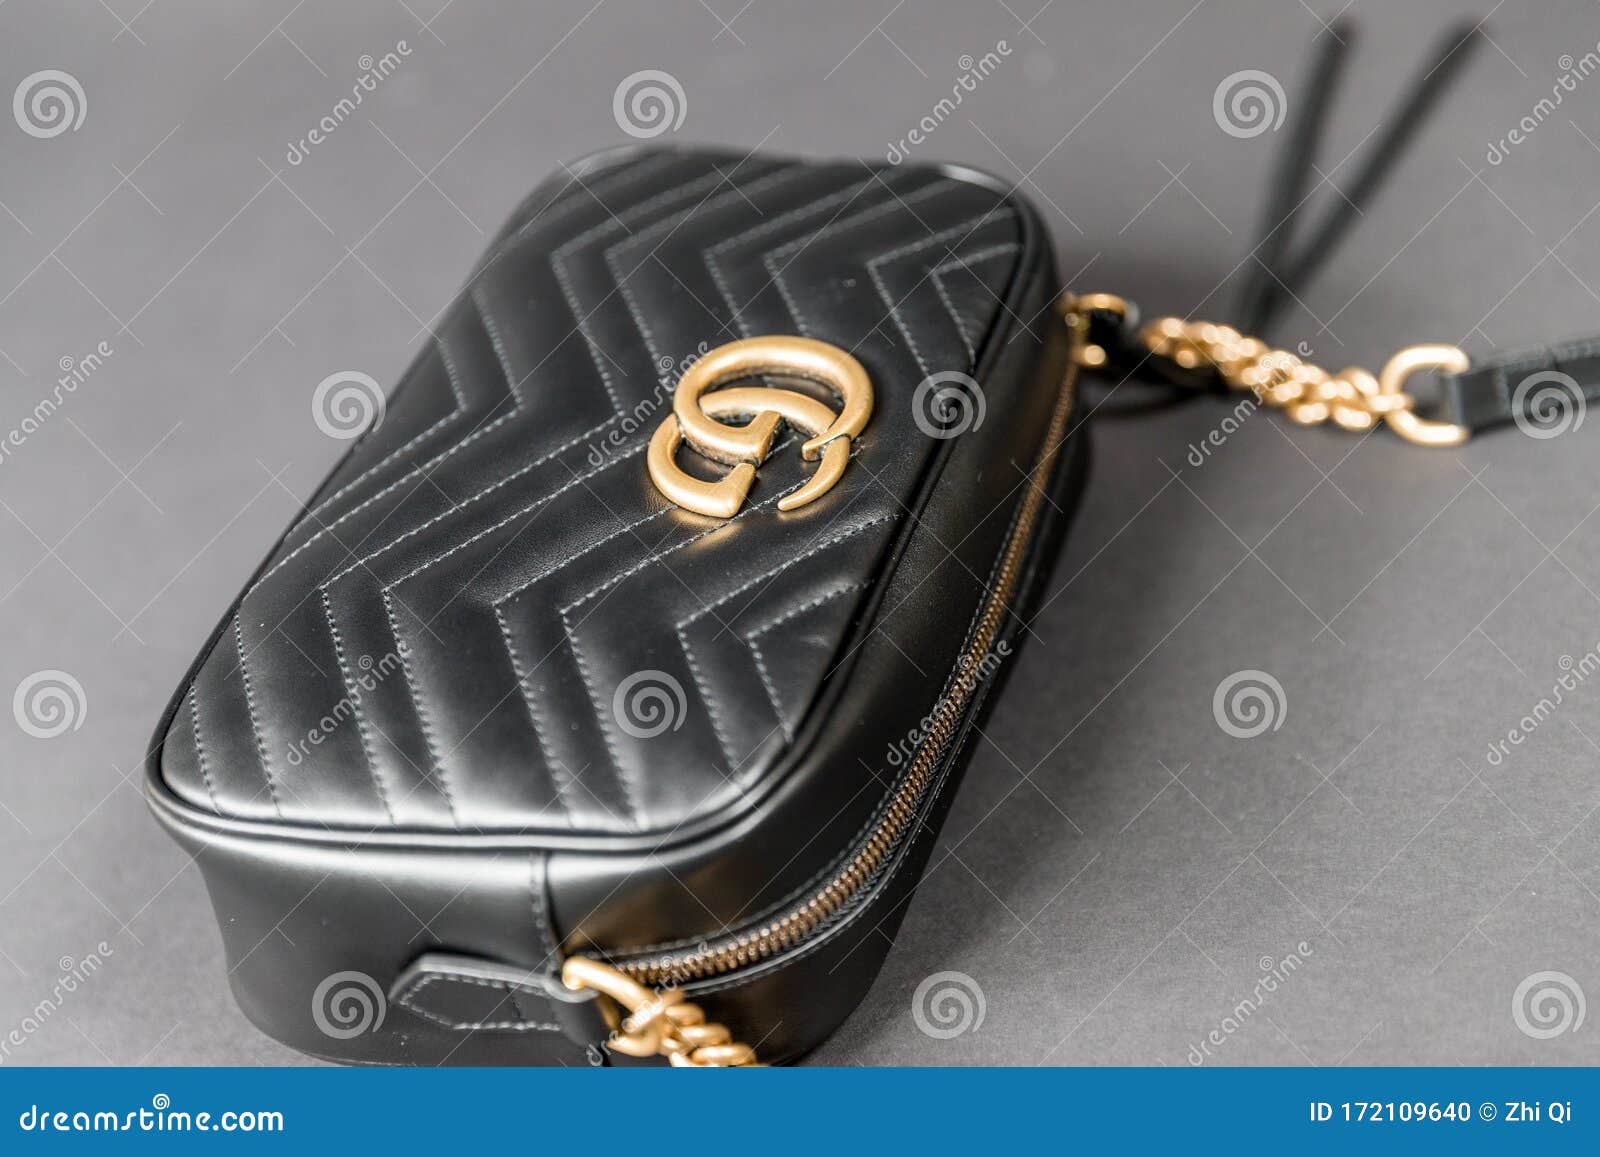 GG Marmont Small Matelasse Shoulder Bag Editorial Image - Image of gucci, italy: 172109640